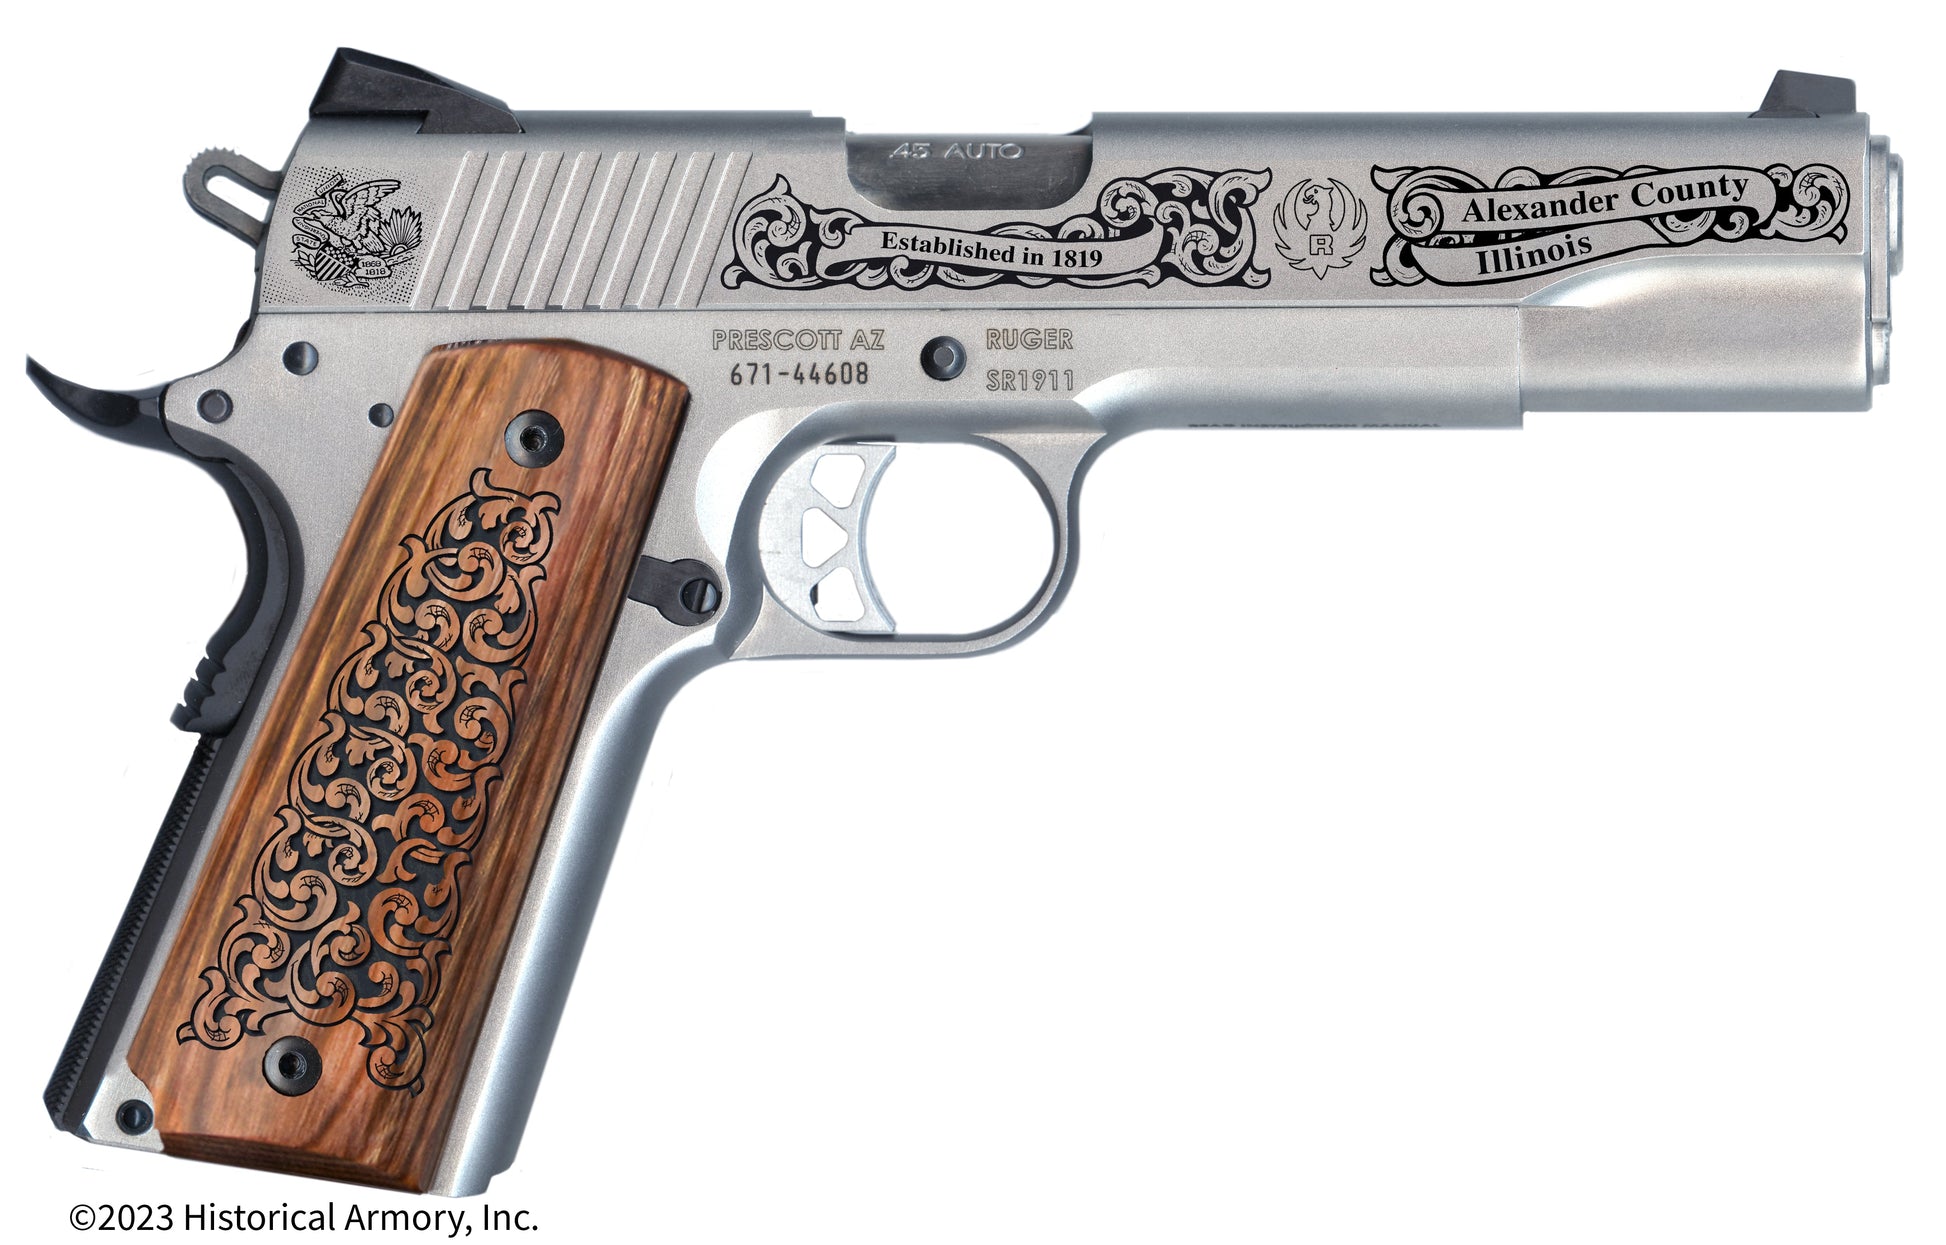 Alexander County Illinois Engraved .45 Auto Ruger 1911